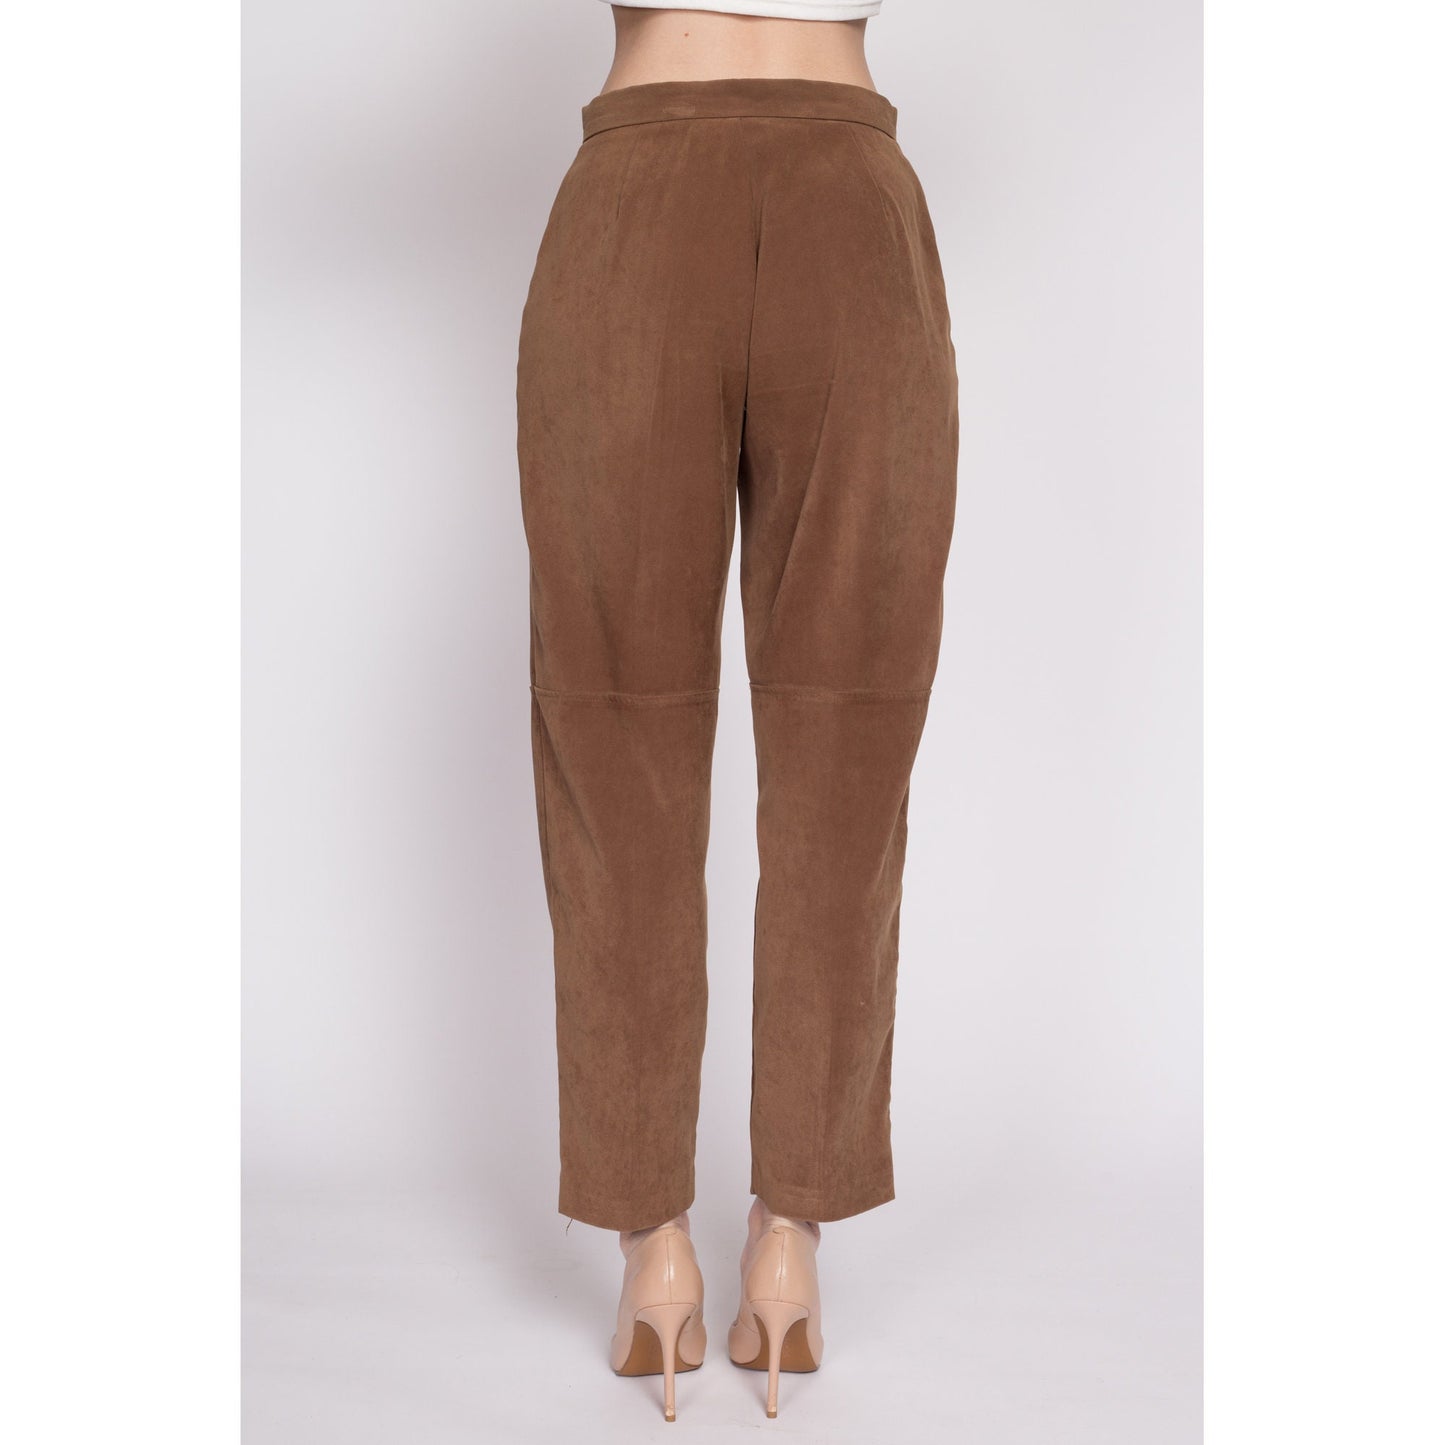 80s Brown Ultrasuede Trousers - Petite Medium, 28.5" | Vintage Faux Leather Tapered Leg Pants